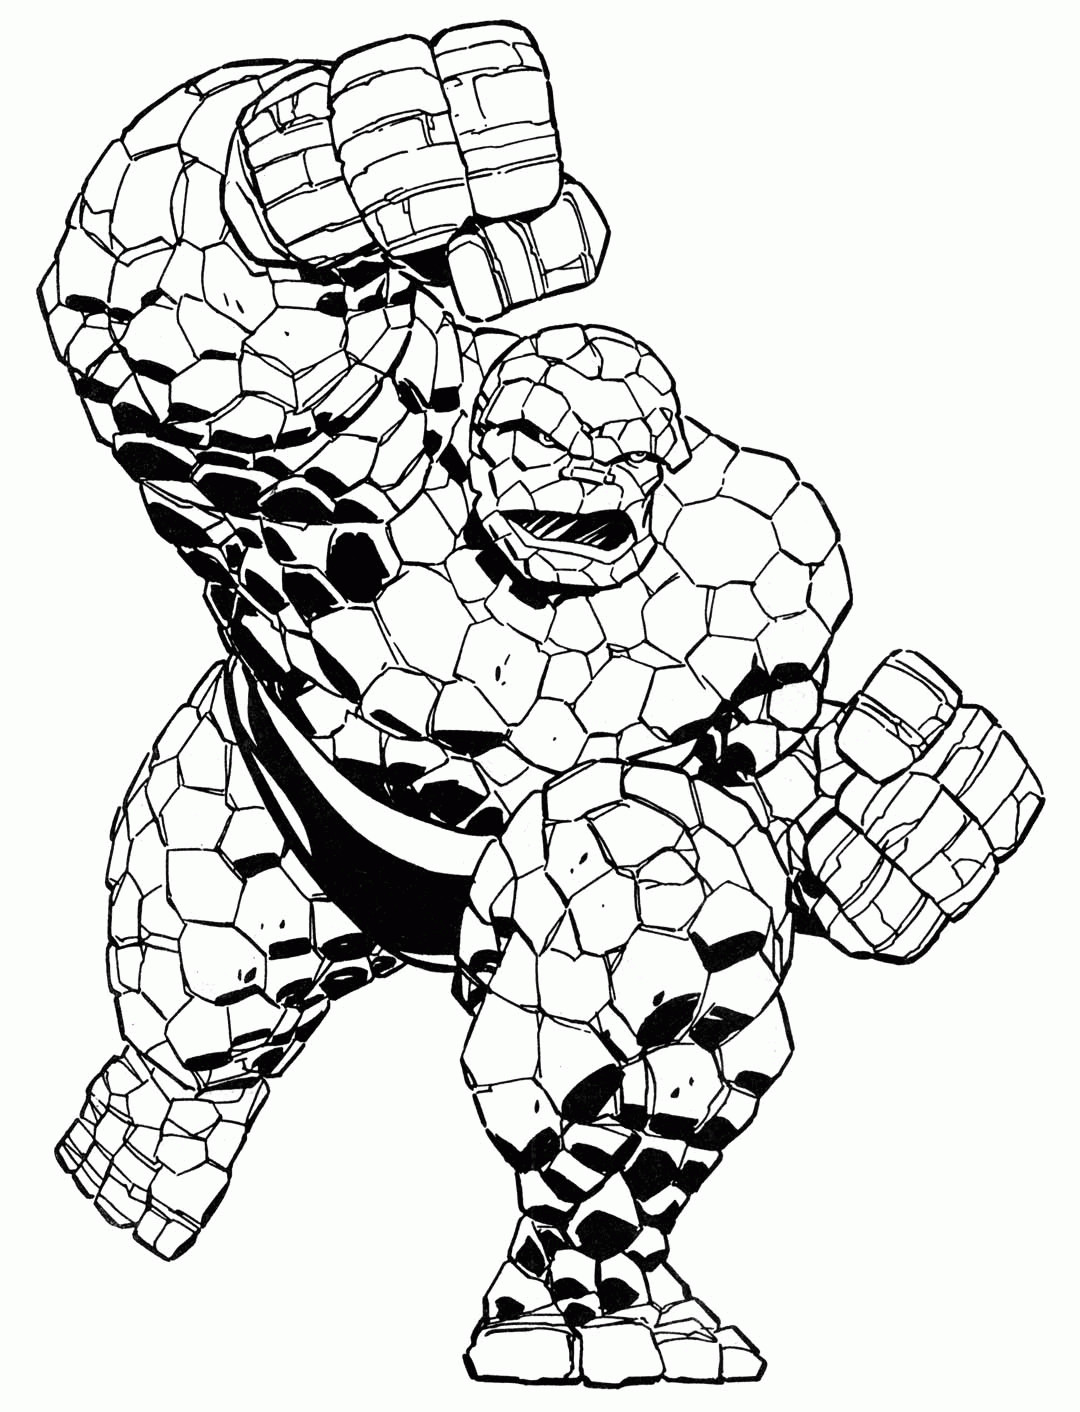 Marvel Printable Coloring Pages
 Marvel Coloring Pages Best Coloring Pages For Kids